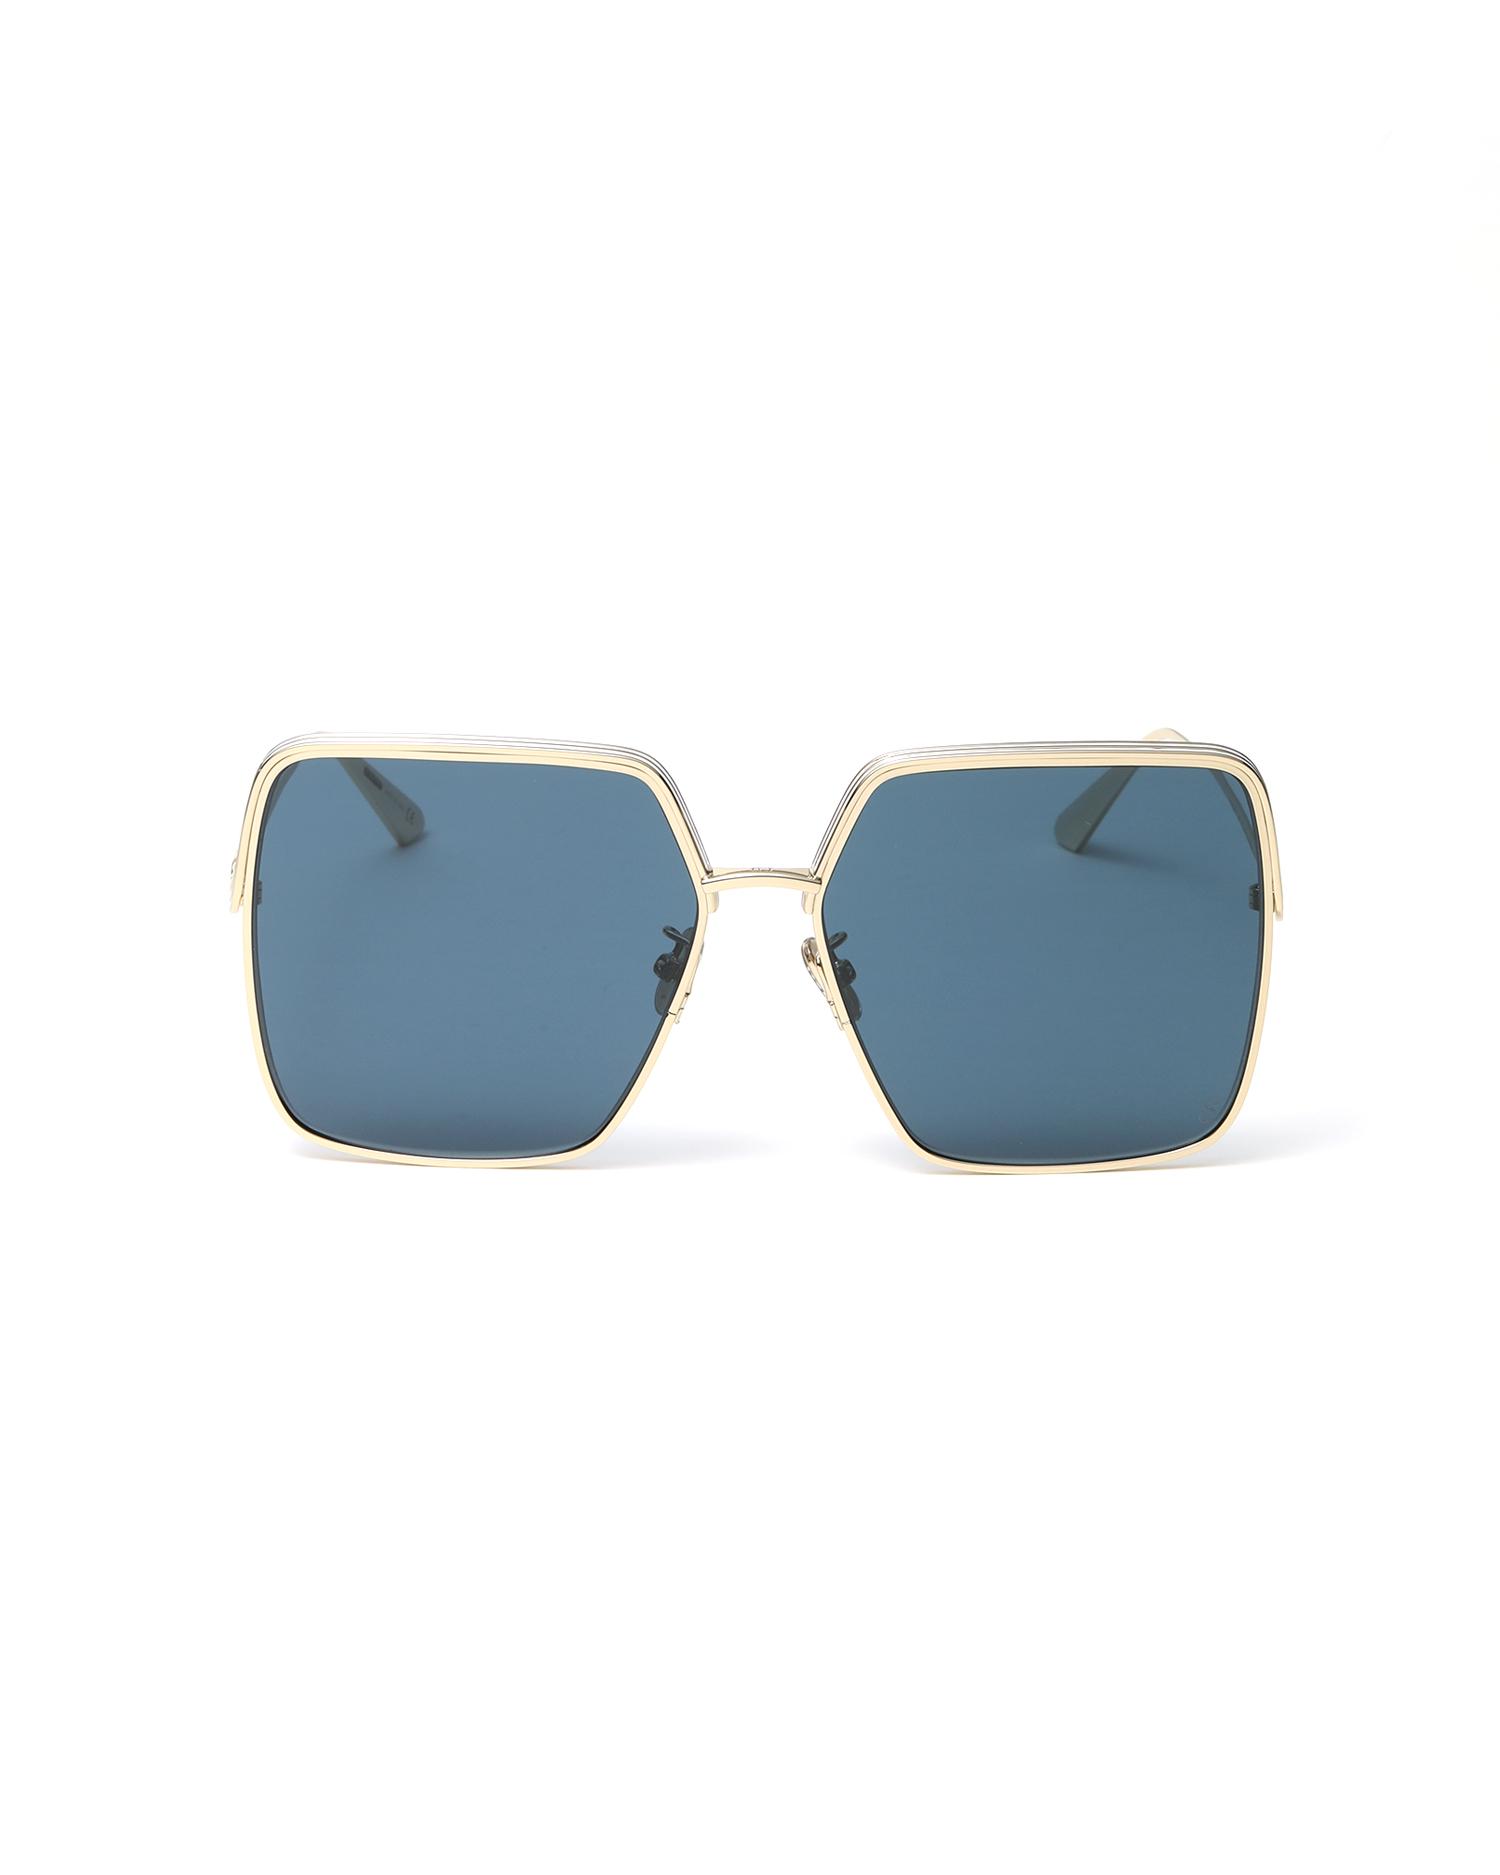 Shaded square Sunglasses by CHRISTIAN DIOR